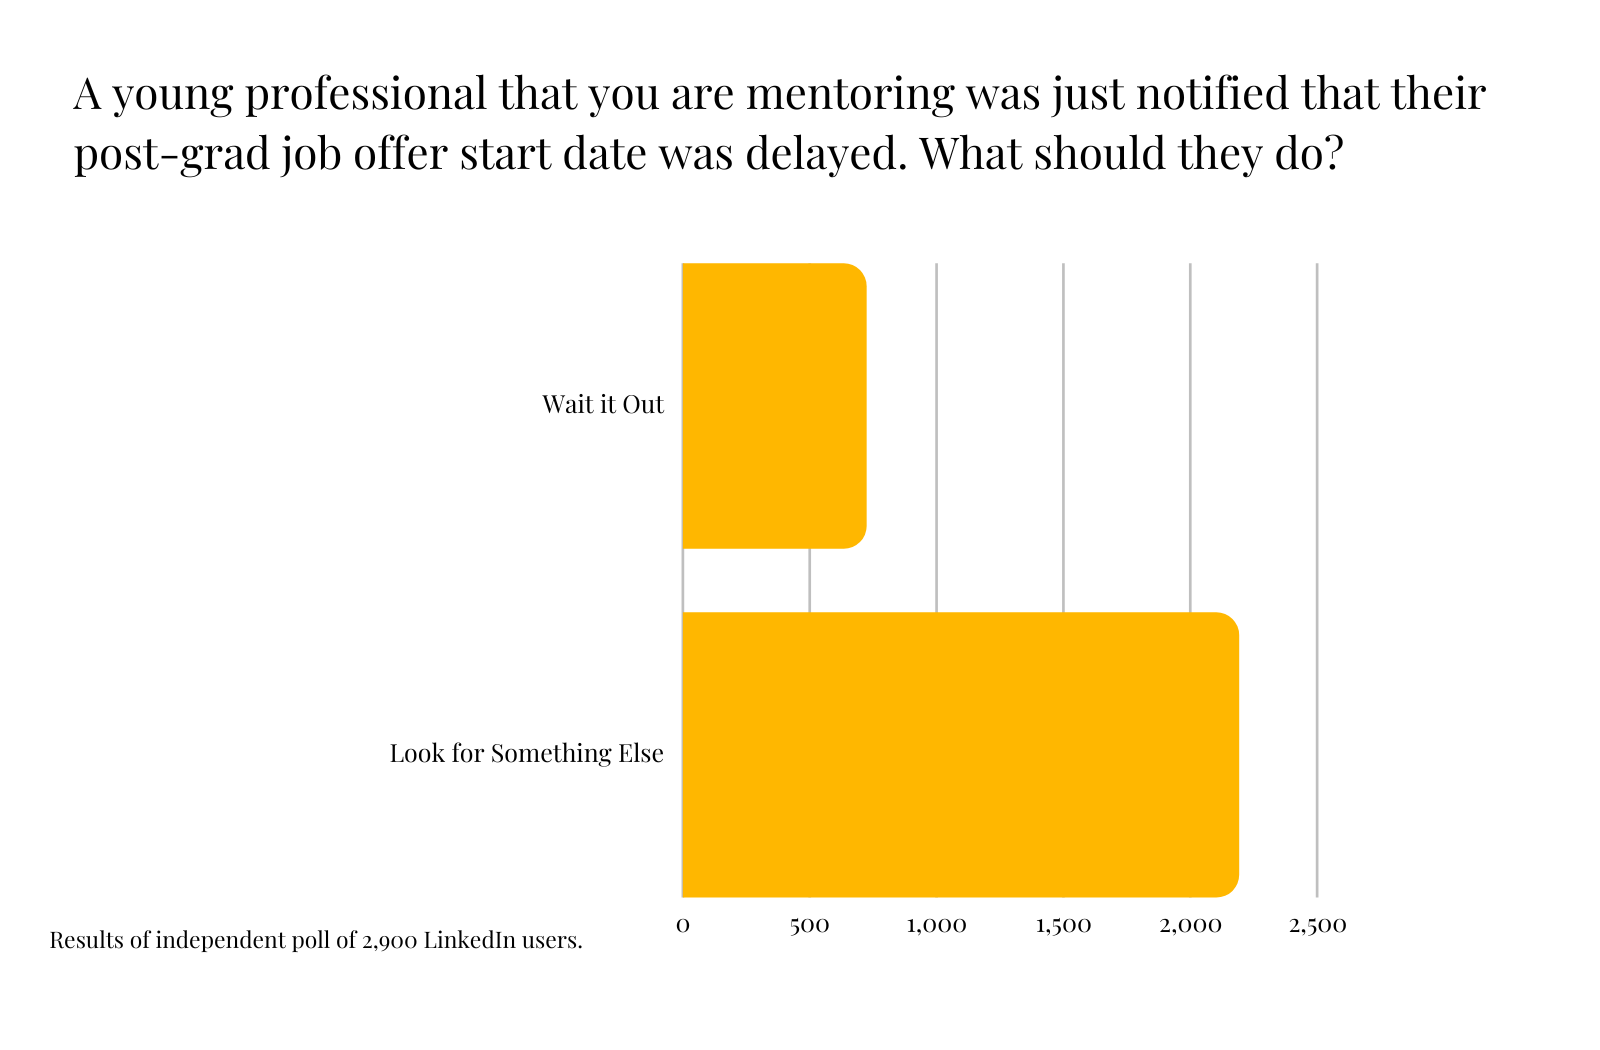 Poll results of how mentors could advise recent hires with delayed start.